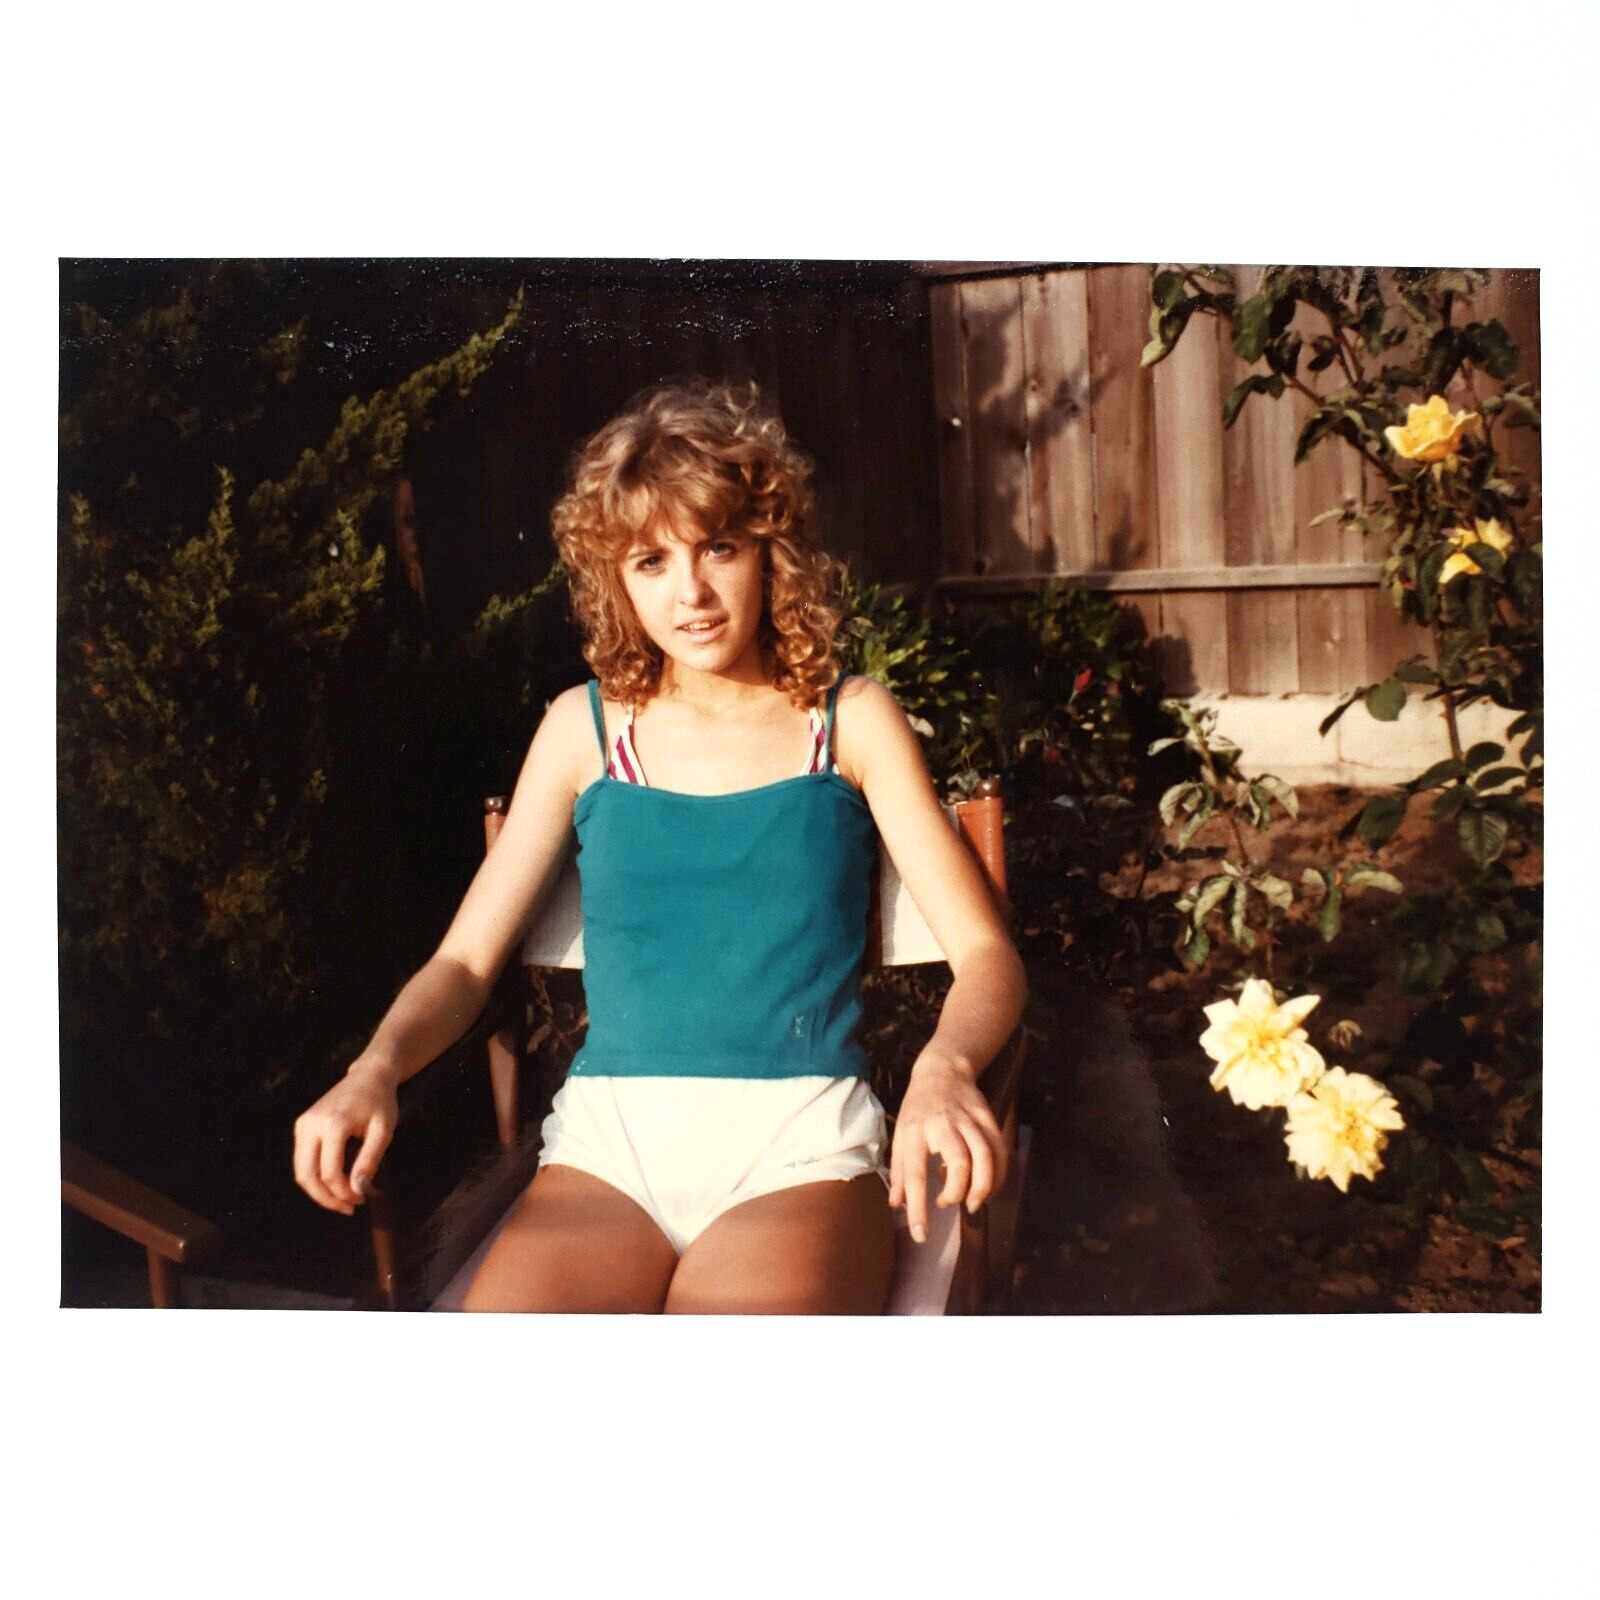 Gorgeous Girl in Flower Garden Photo 1980s Curly-Hair Young Woman Snapshot A4423